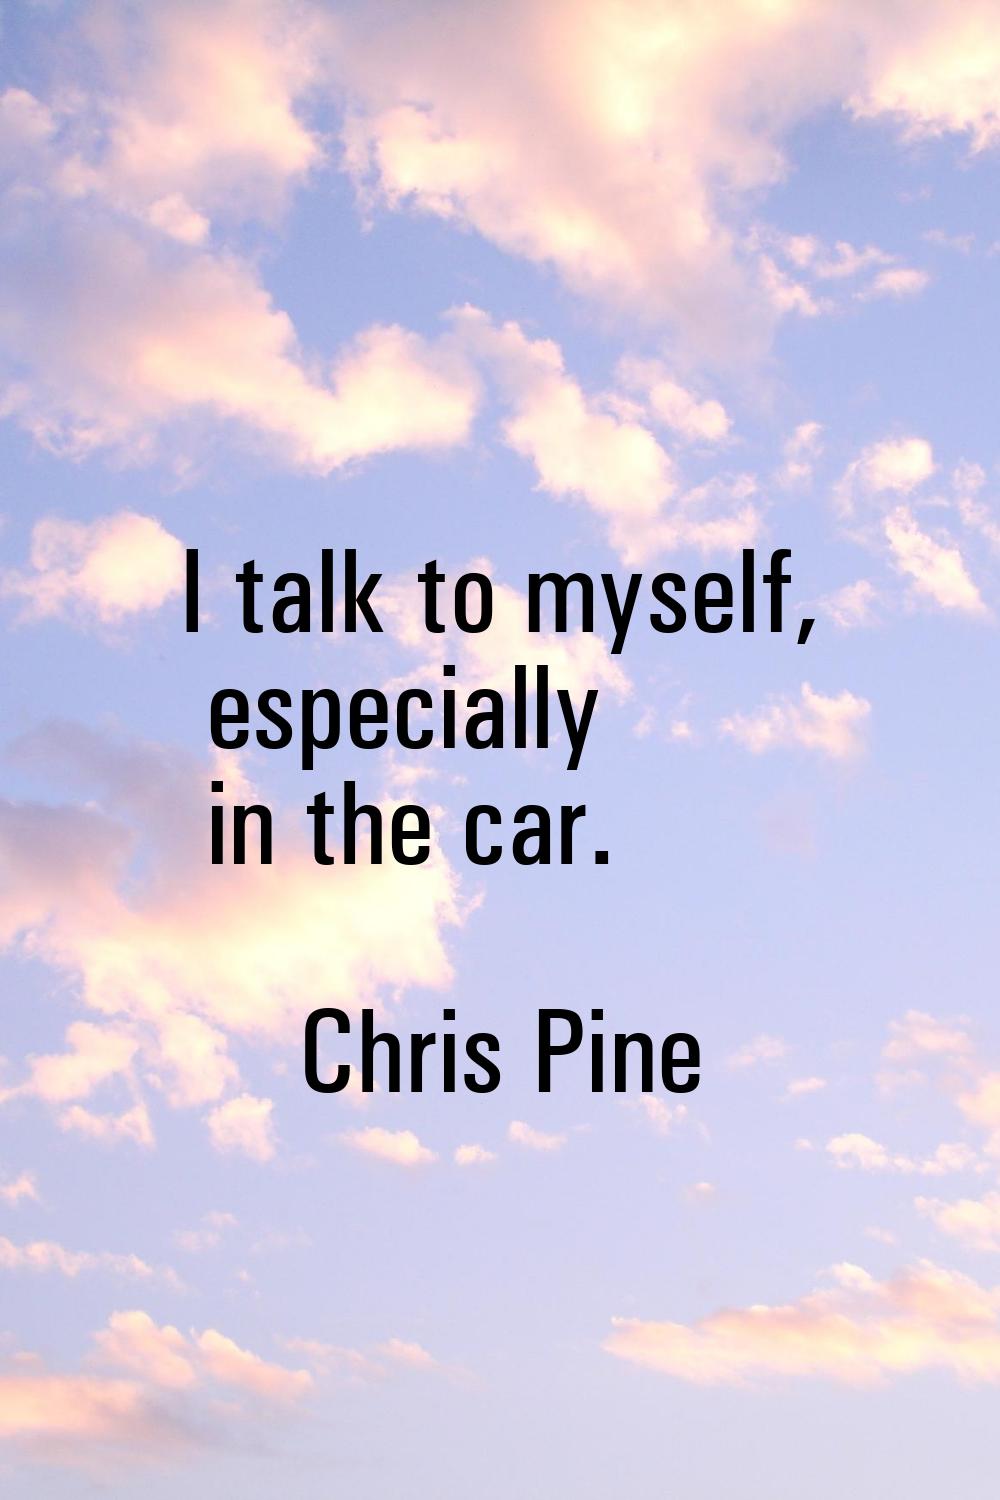 I talk to myself, especially in the car.